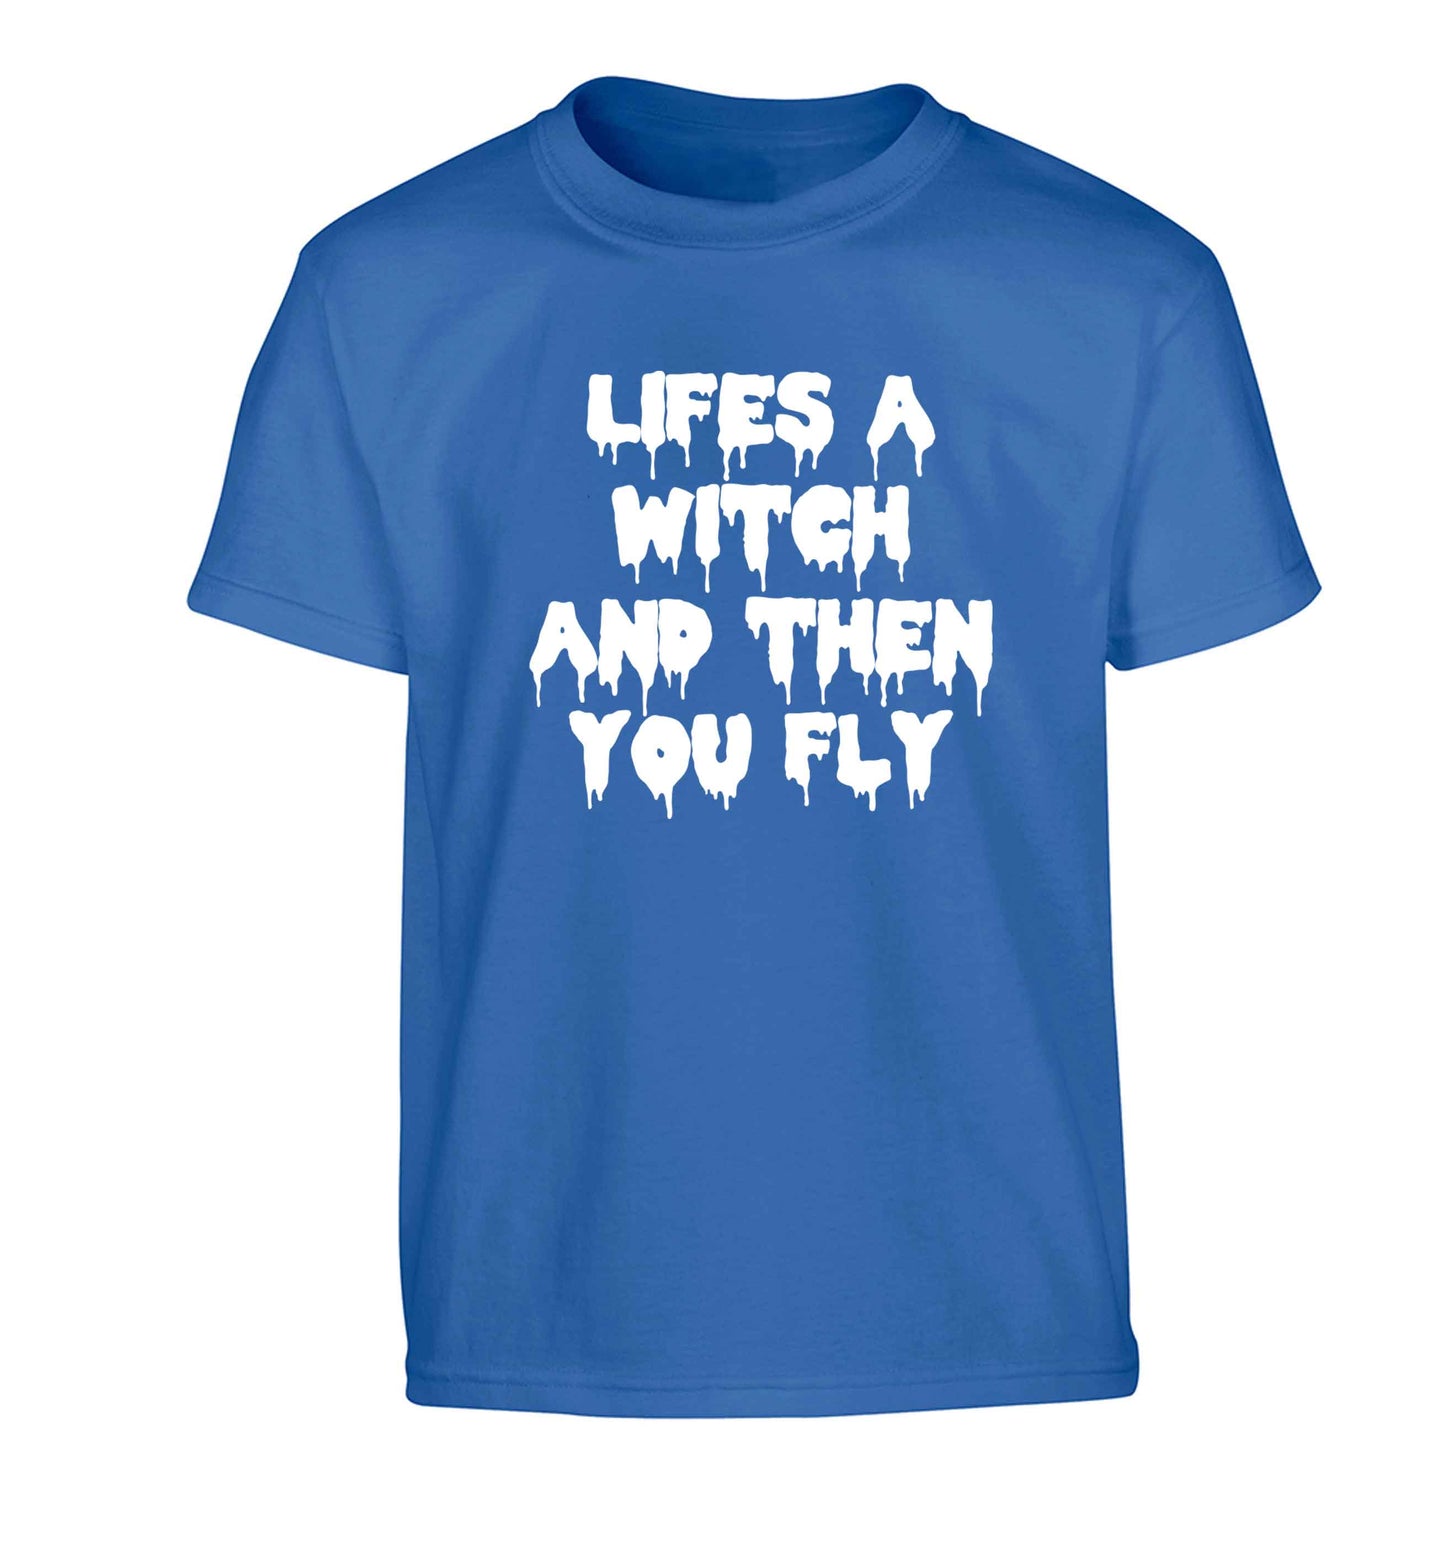 Life's a witch and then you fly Children's blue Tshirt 12-13 Years